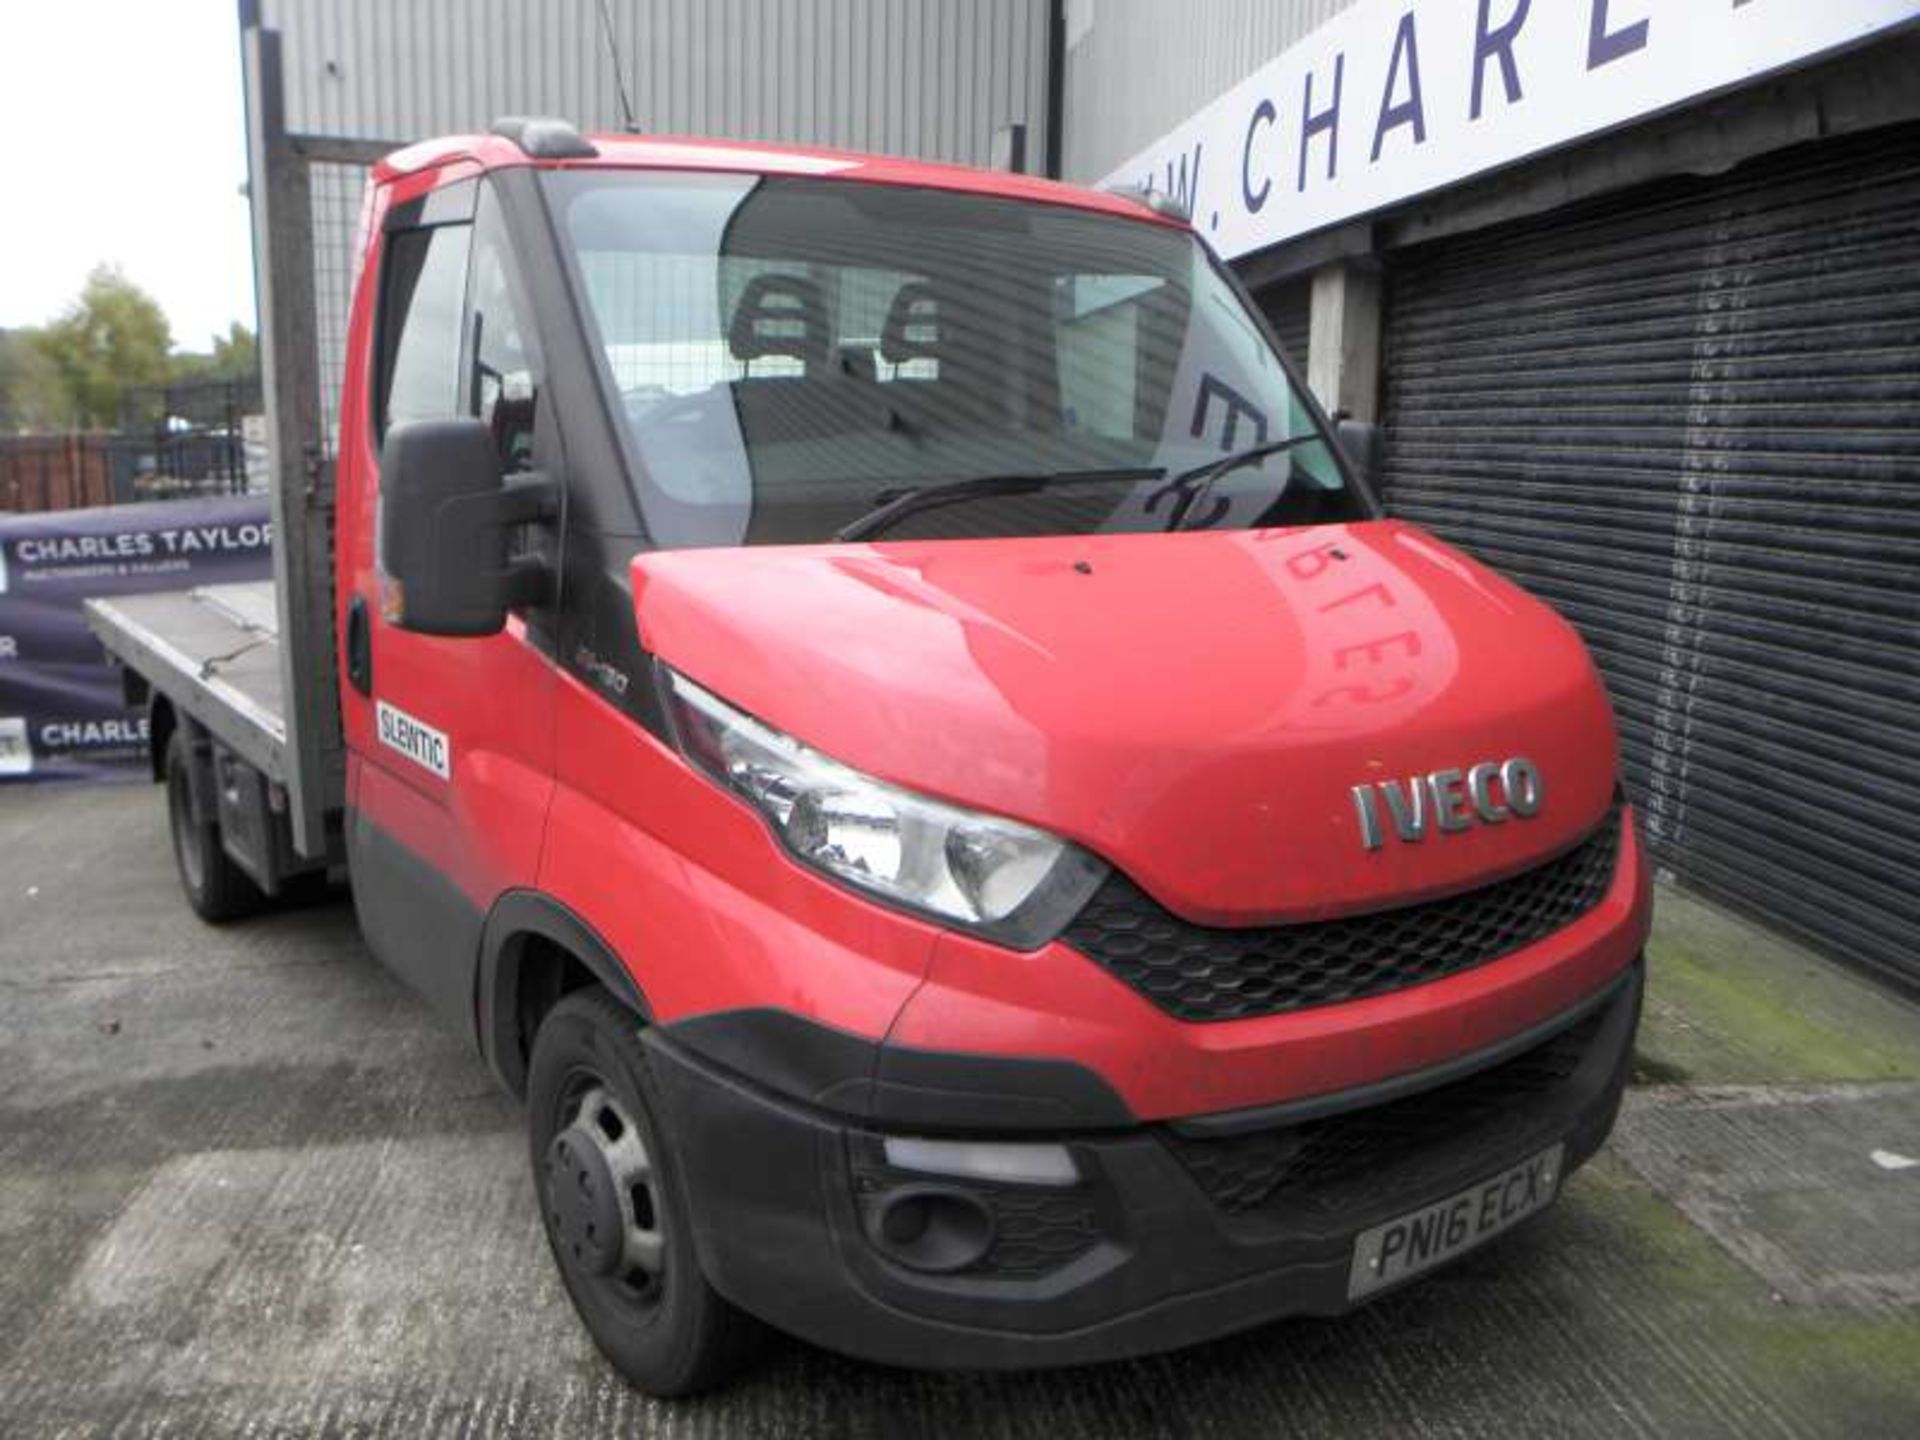 RED IVECO DAILY 35C13. ( DIESEL ) Reg : PN16 ECX Mileage : 118,101 Log Book. First Registered :4/5/